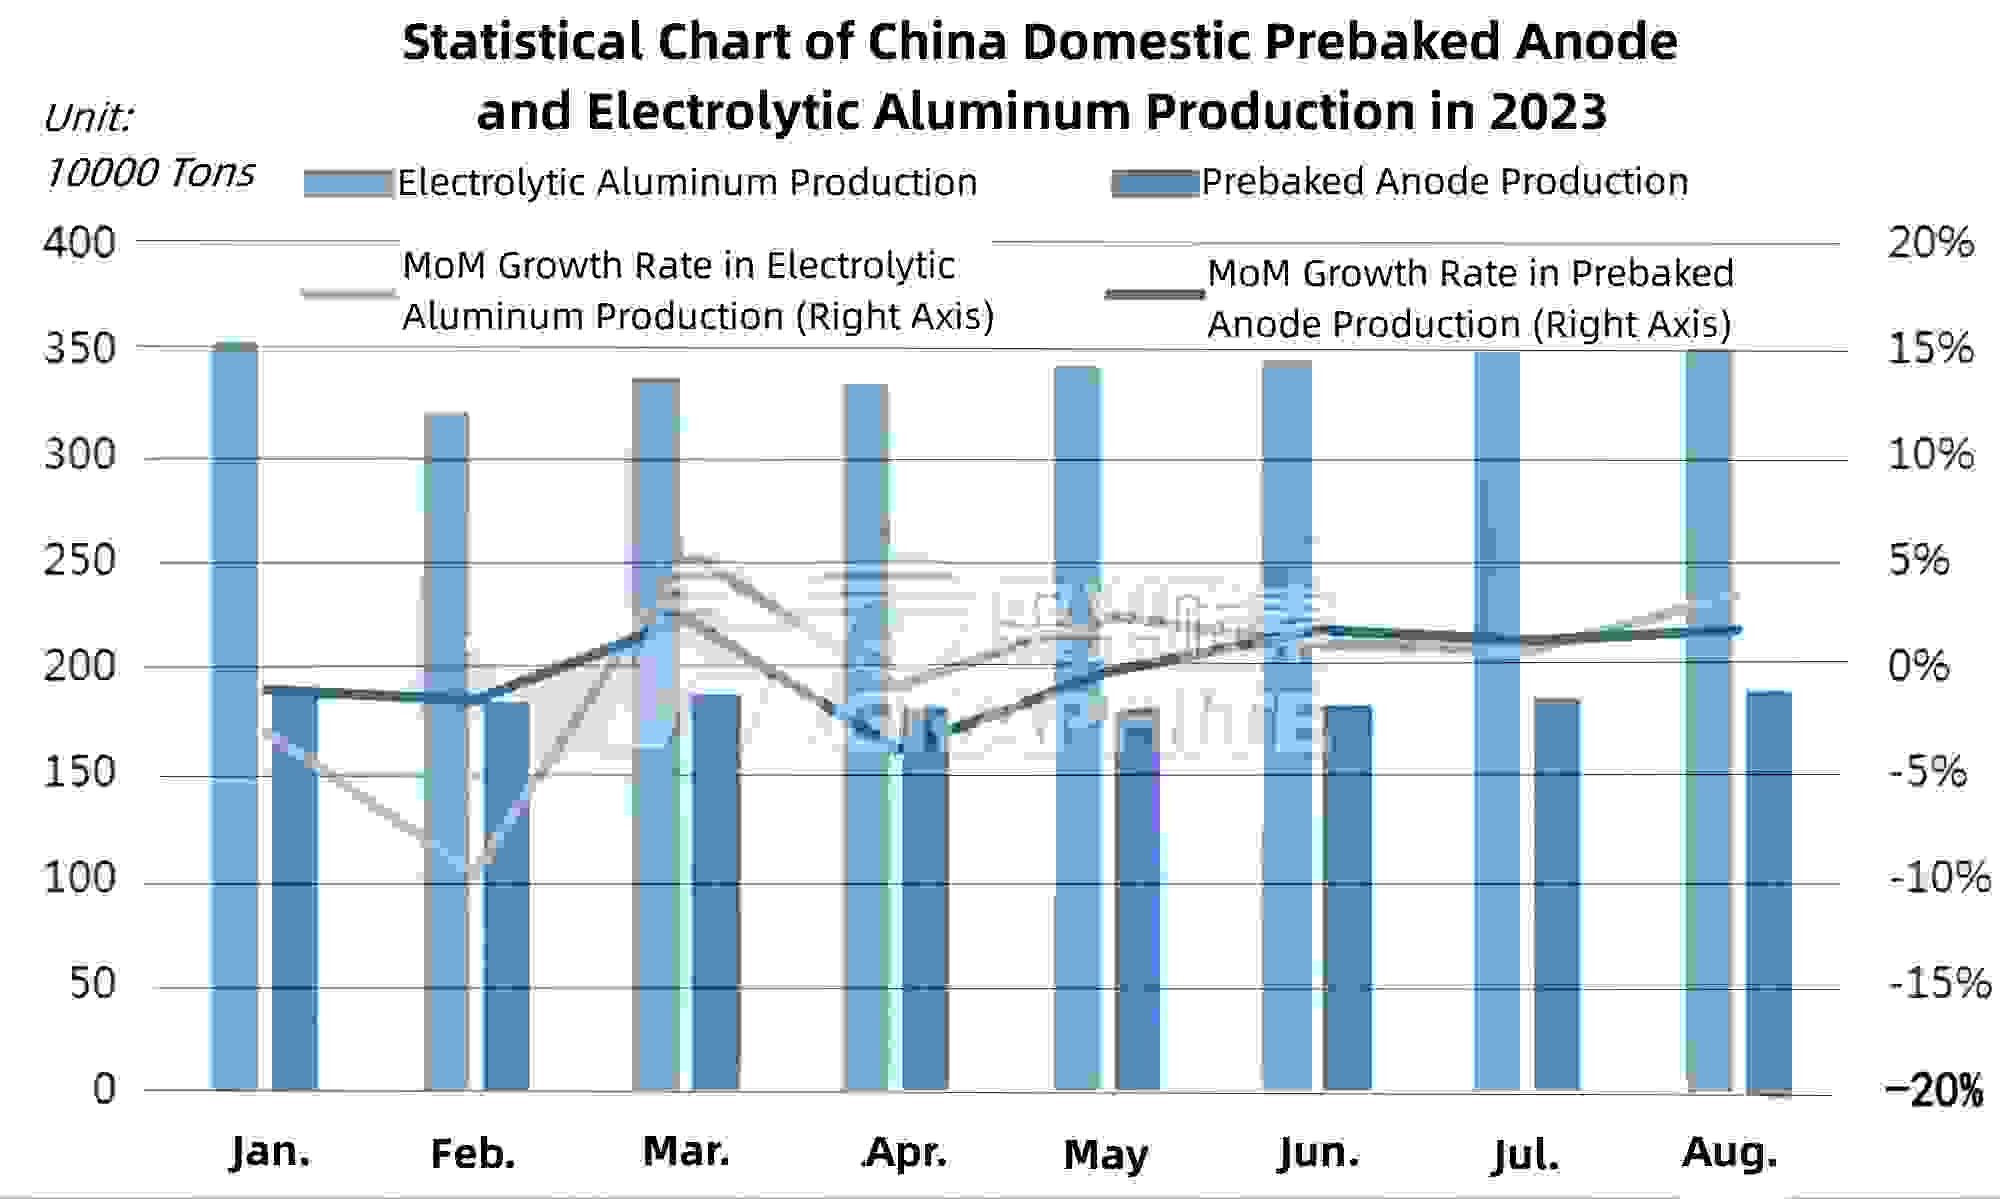 Statistical Chart of China Domestic Prebaked Anode and Electrolytic Aluminum Production in 2023.jpg